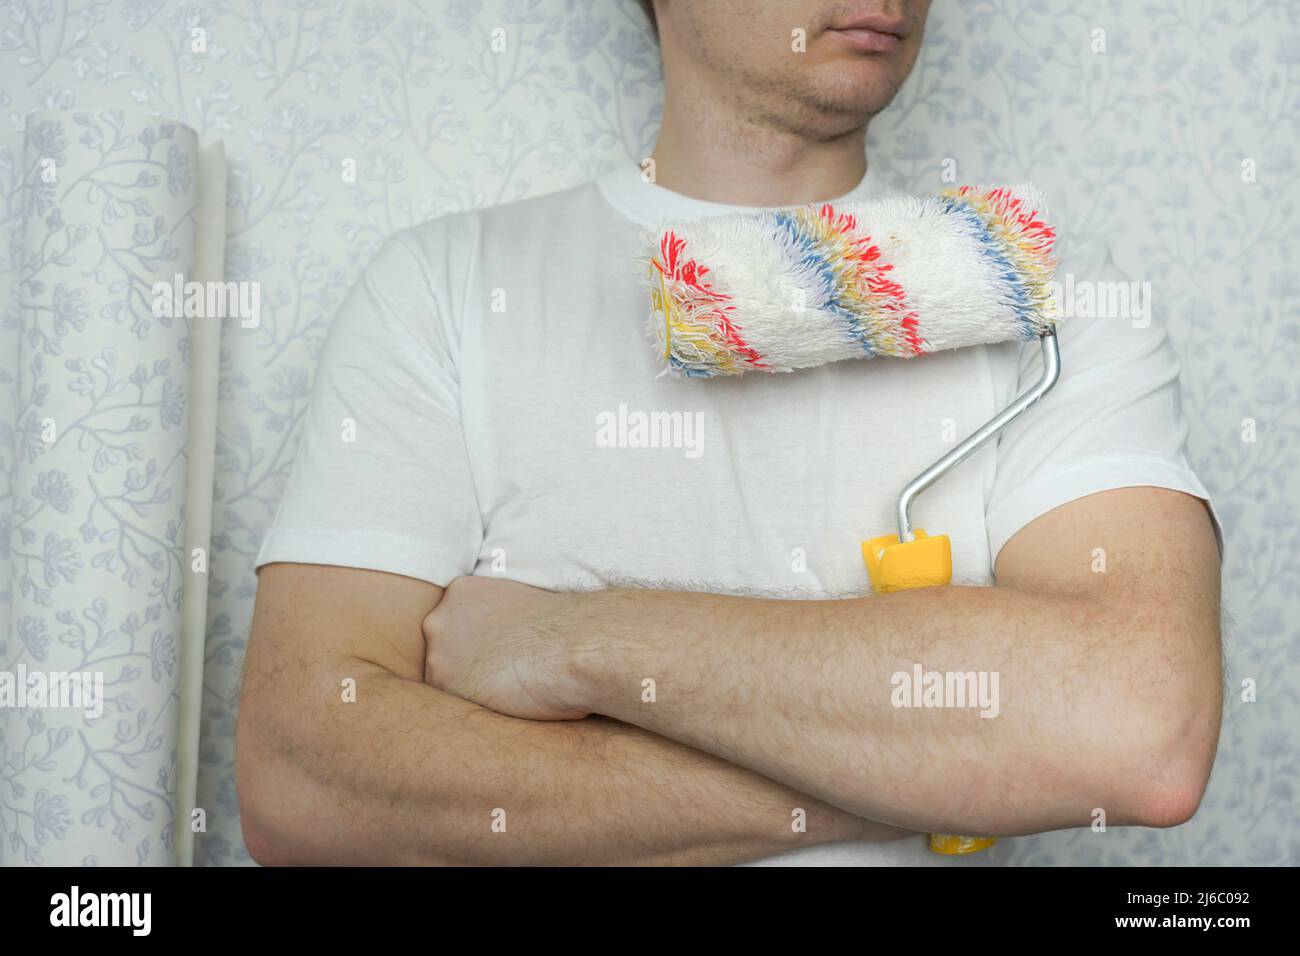 a man in a white t-shirt holds a roller with a long pile for applying glue and paint Stock Photo